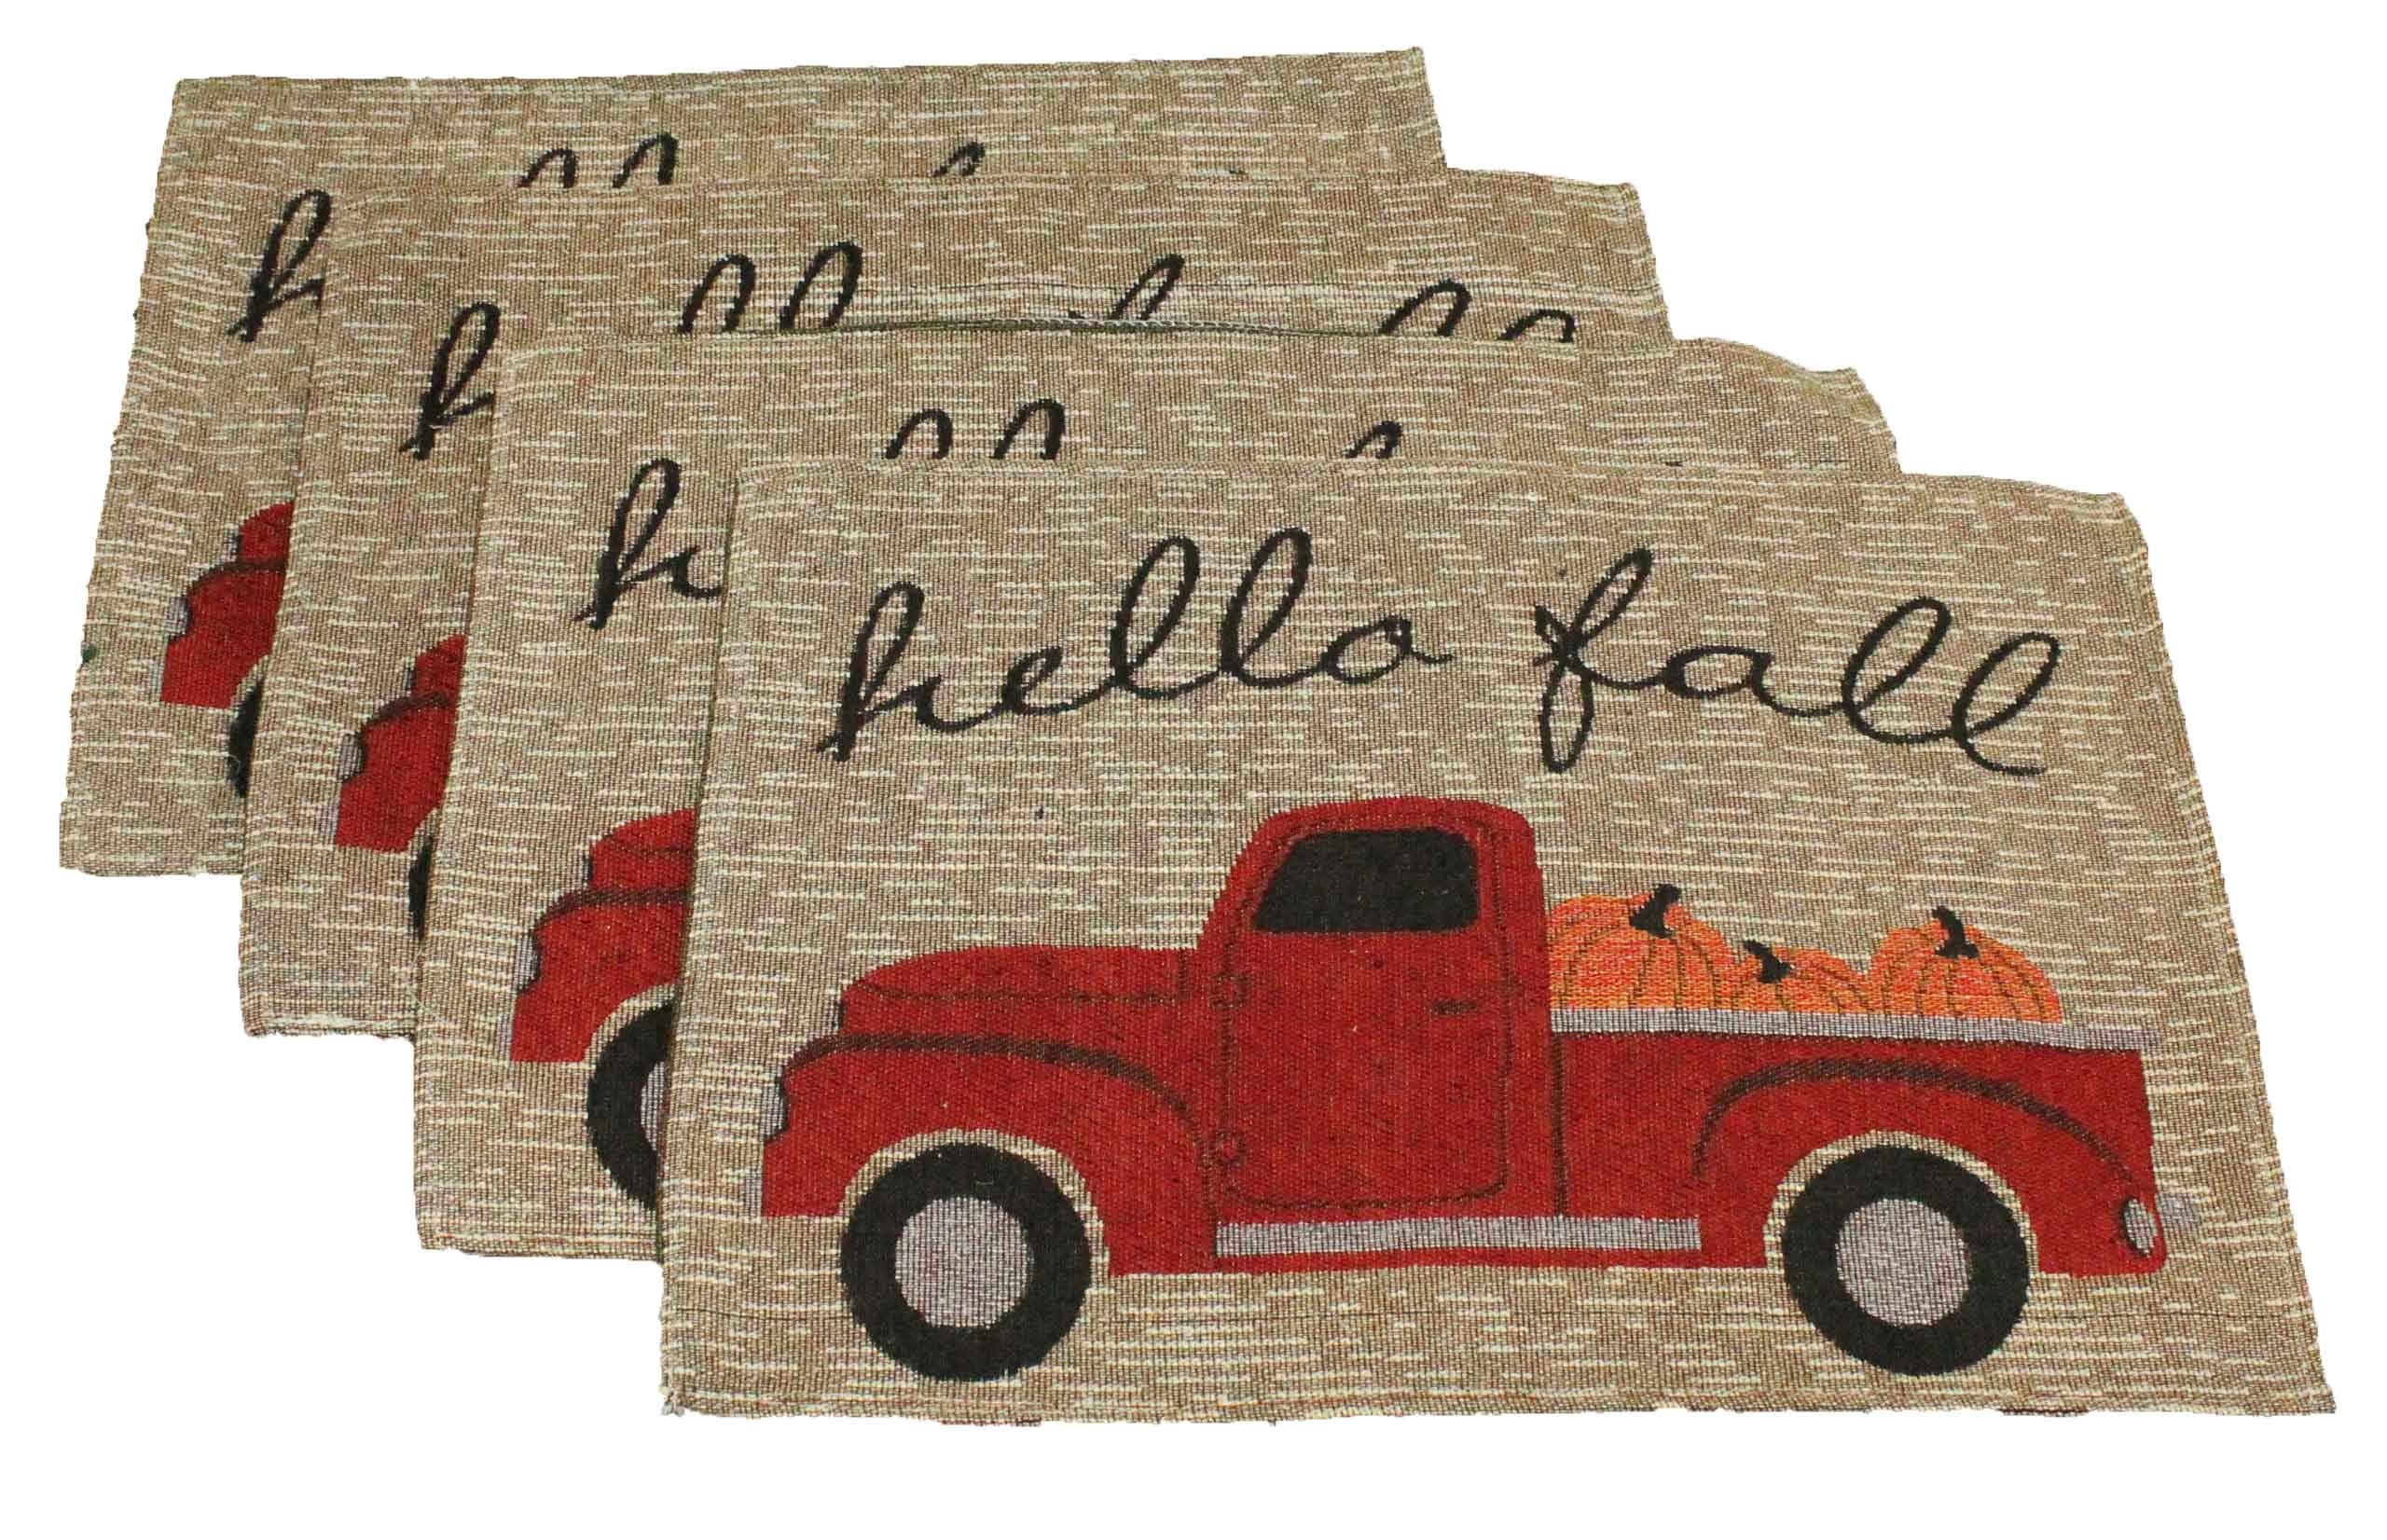 4 pc Hello Fall Placemats - Vintage Truck Fall Kitchen Decor Set - Comes in an Organza Bag so It's Ready for Giving!